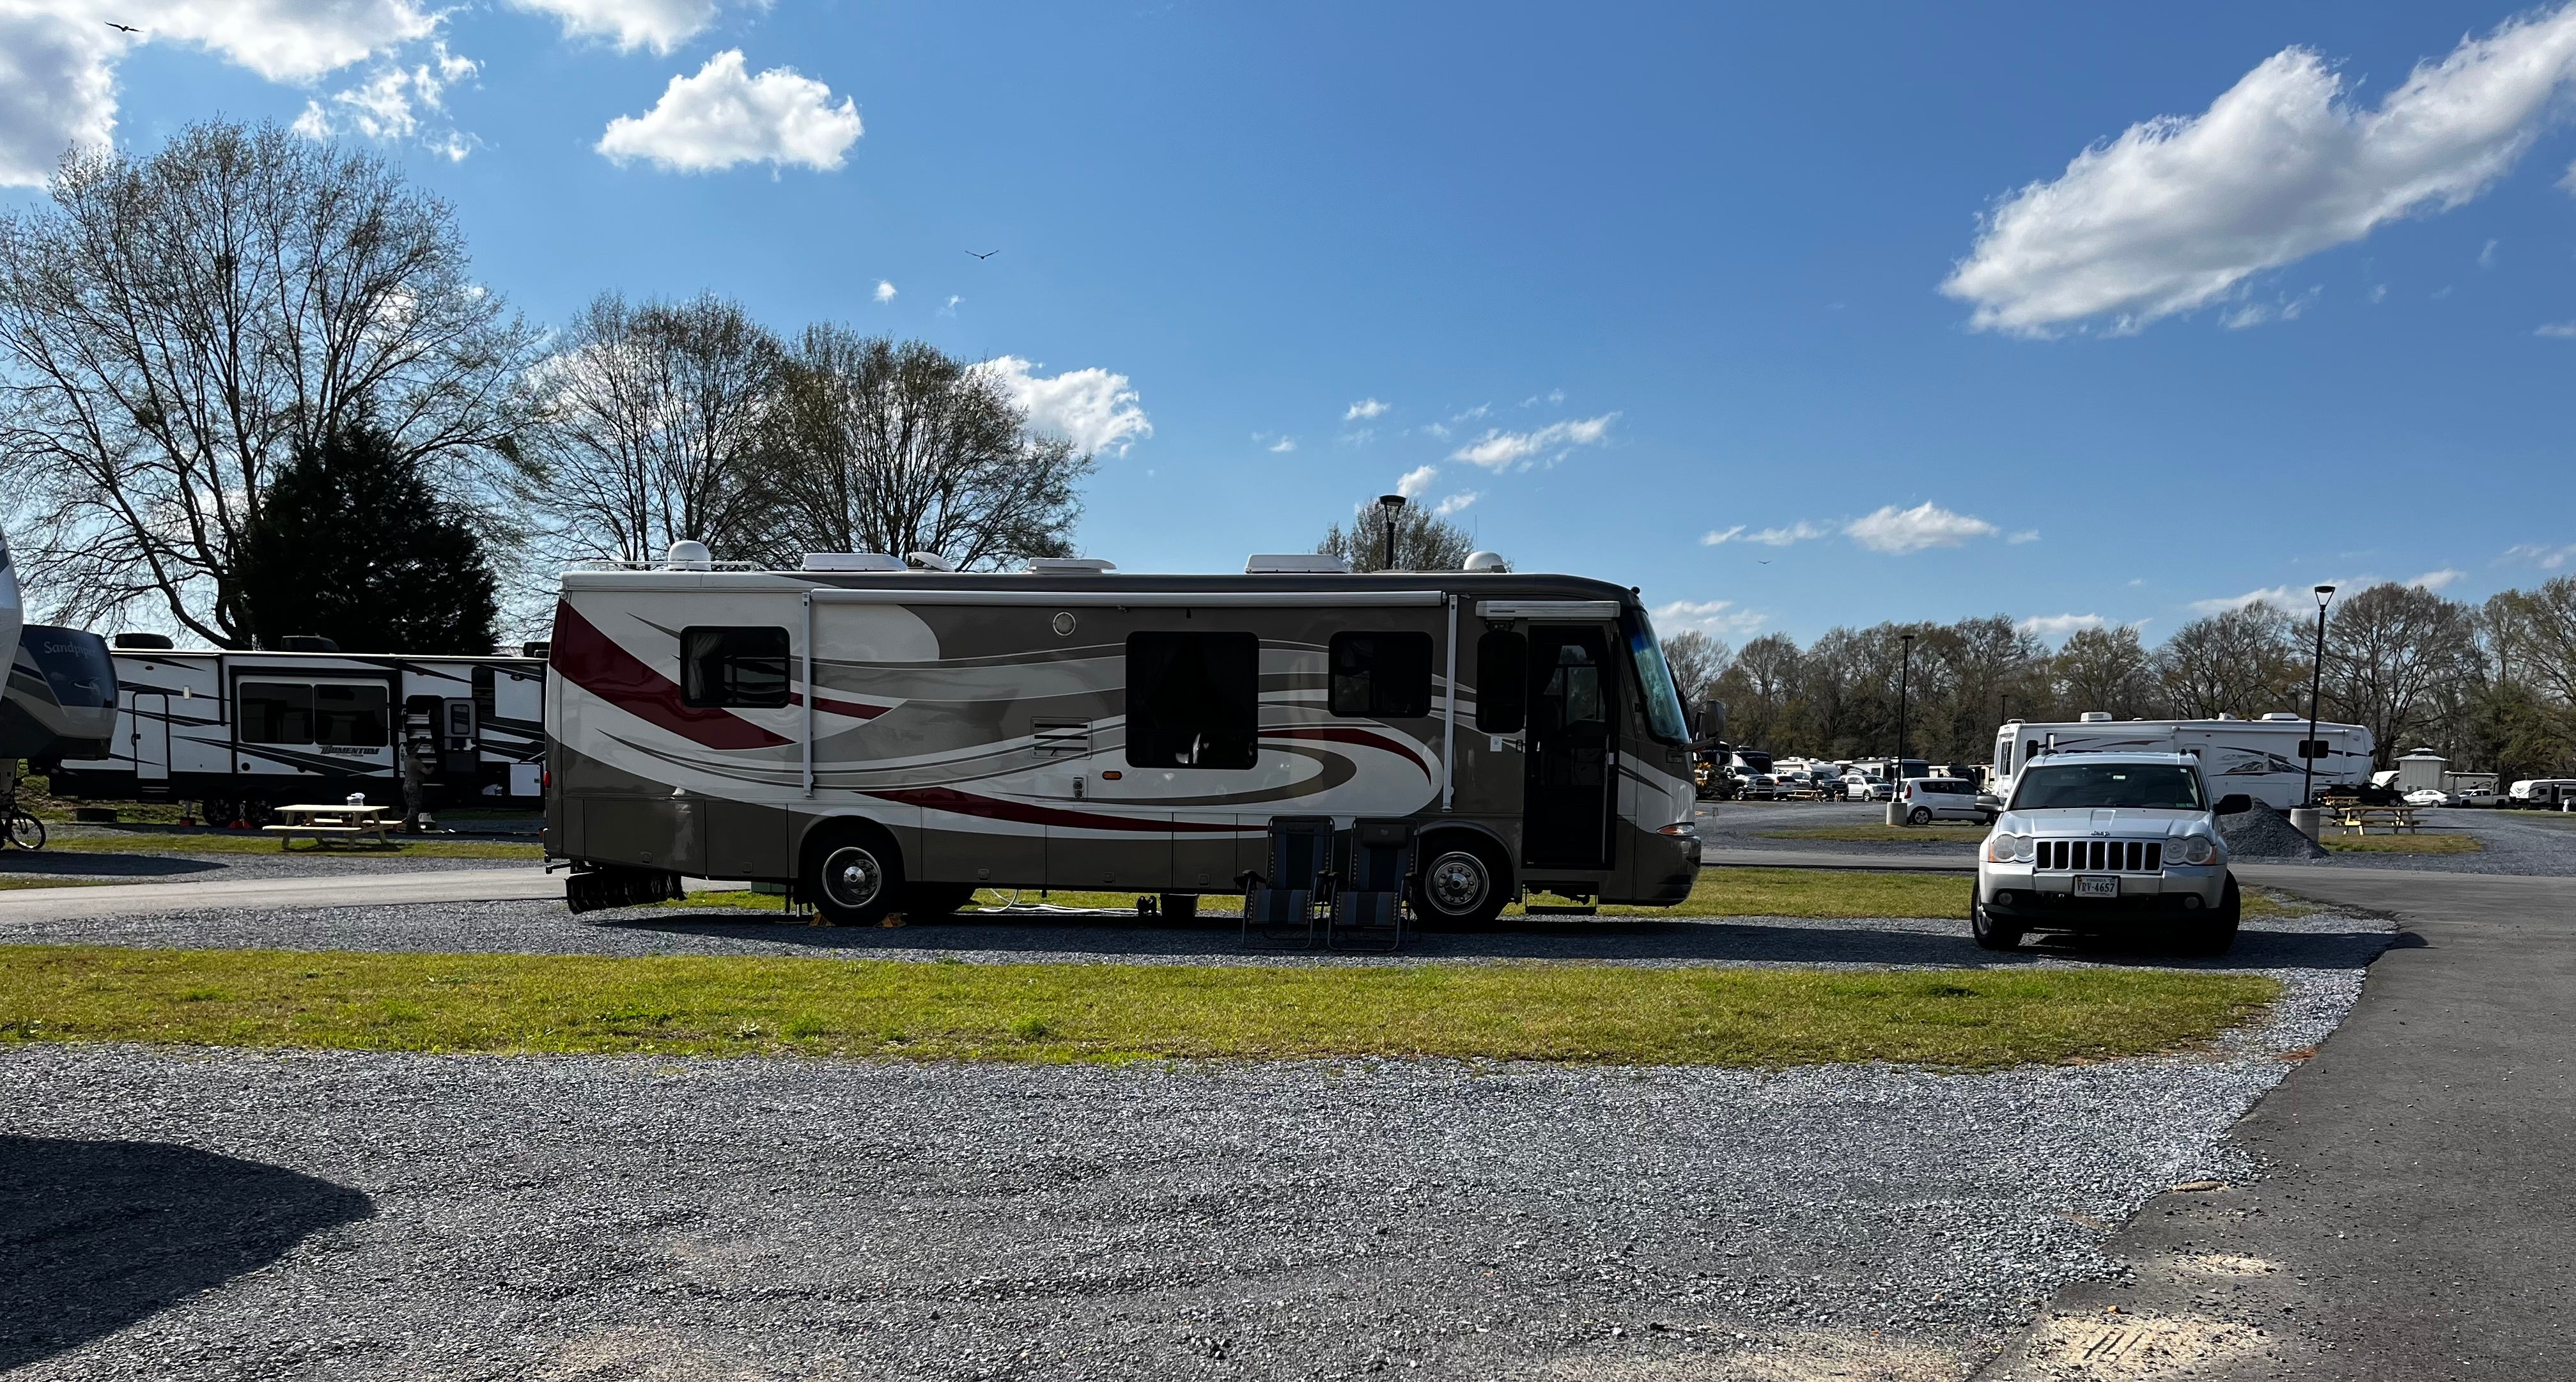 Camper submitted image from Camp Sherrye on the Coosa - 1